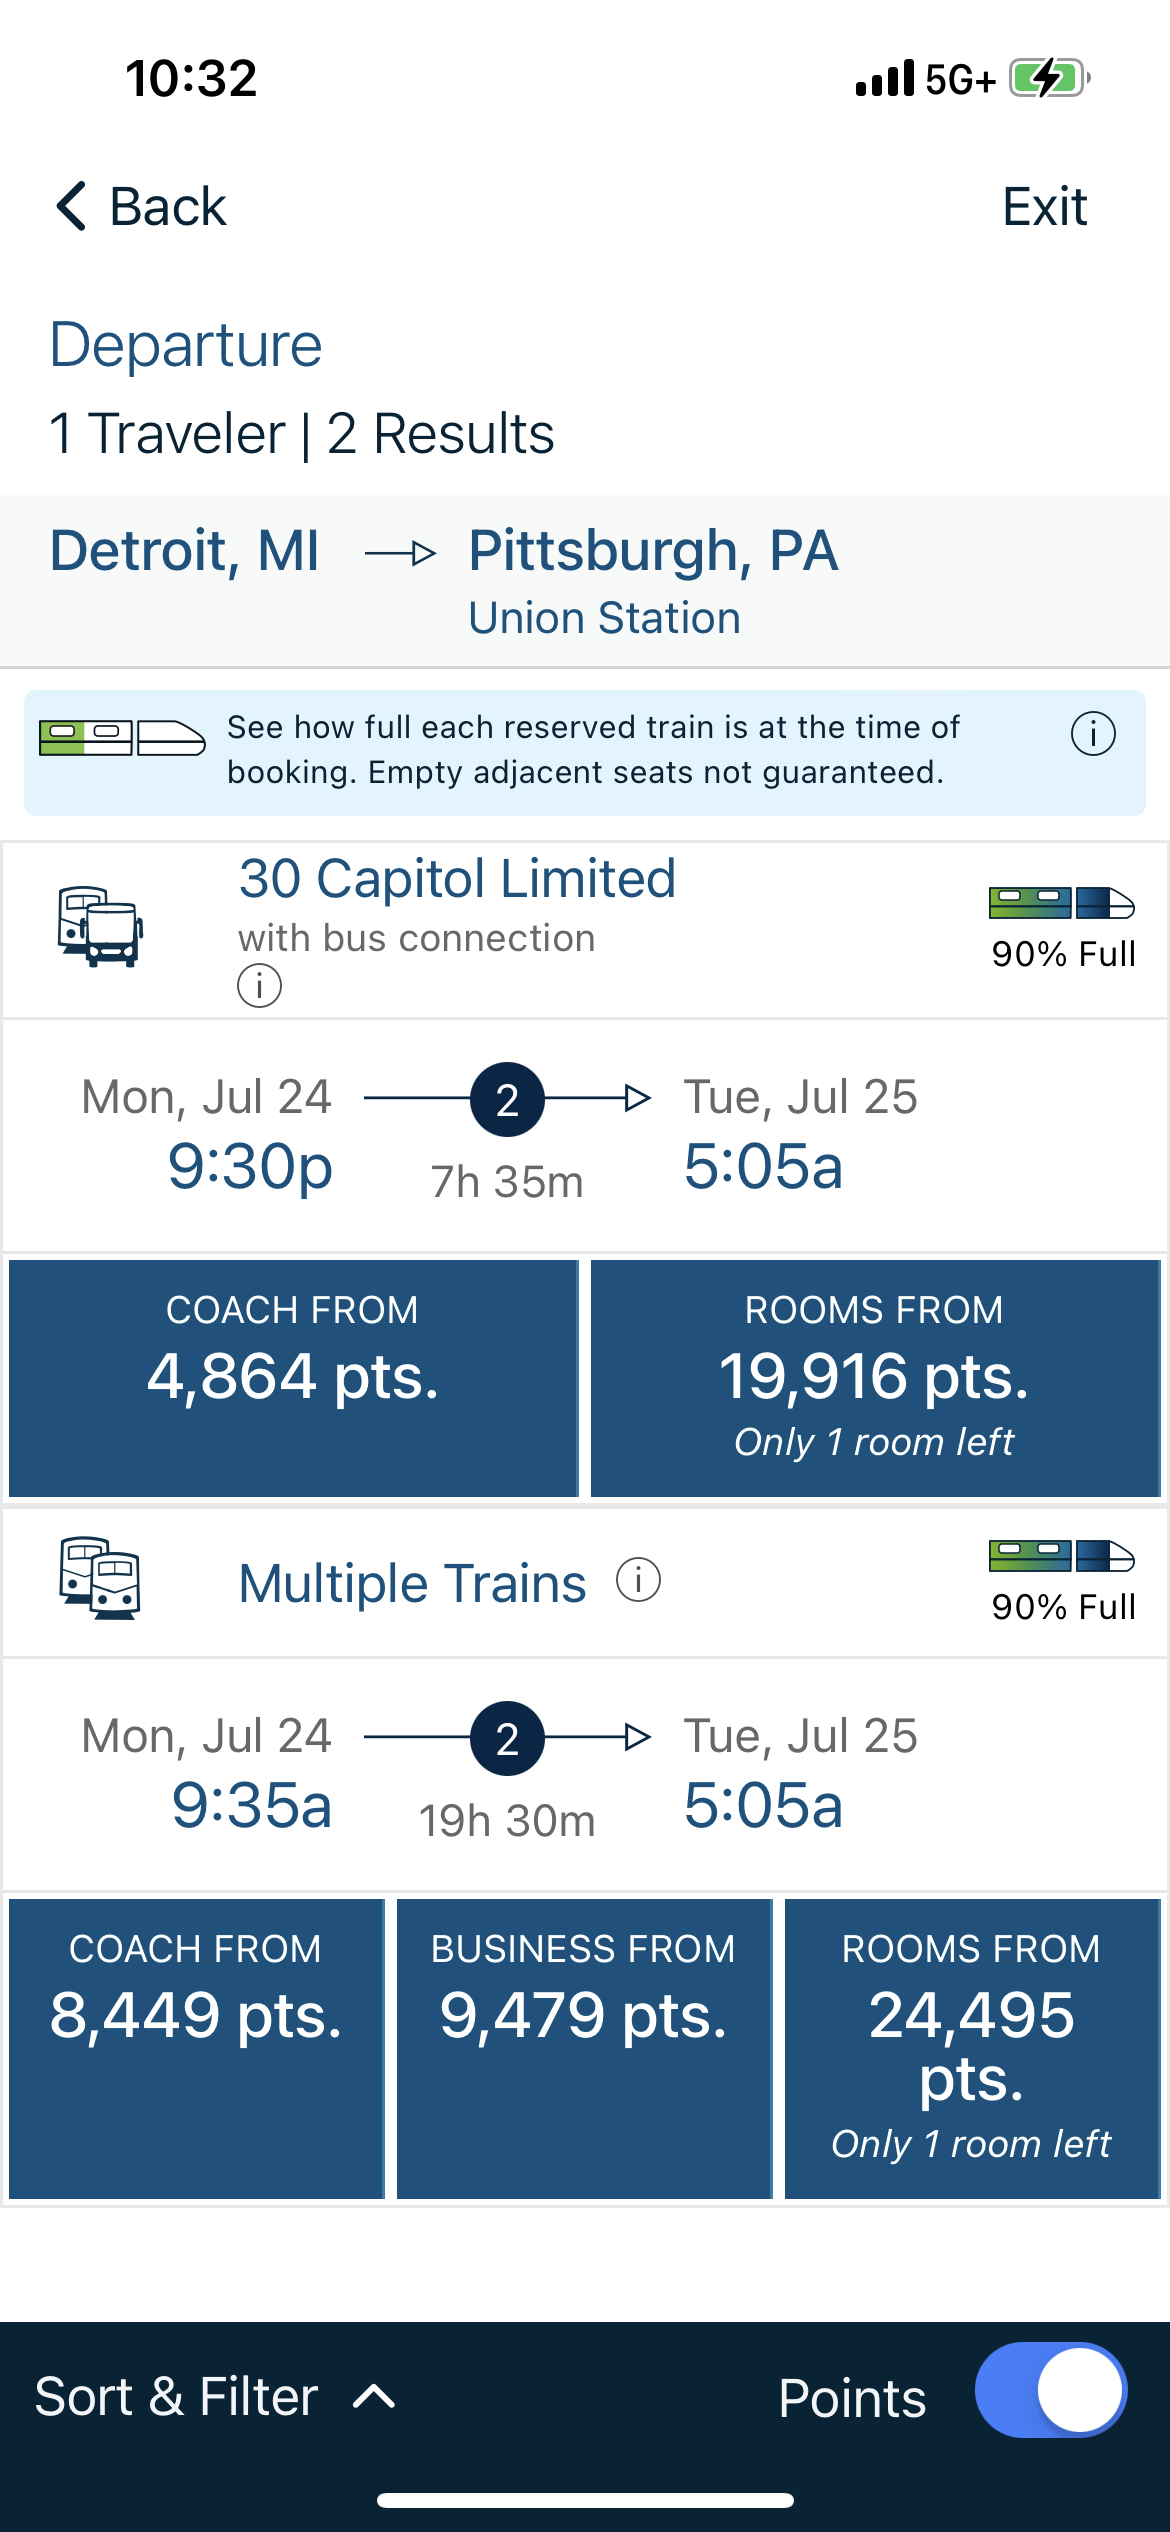 The cost of an Amtrak ride from Detroit to Pittsburgh using points.